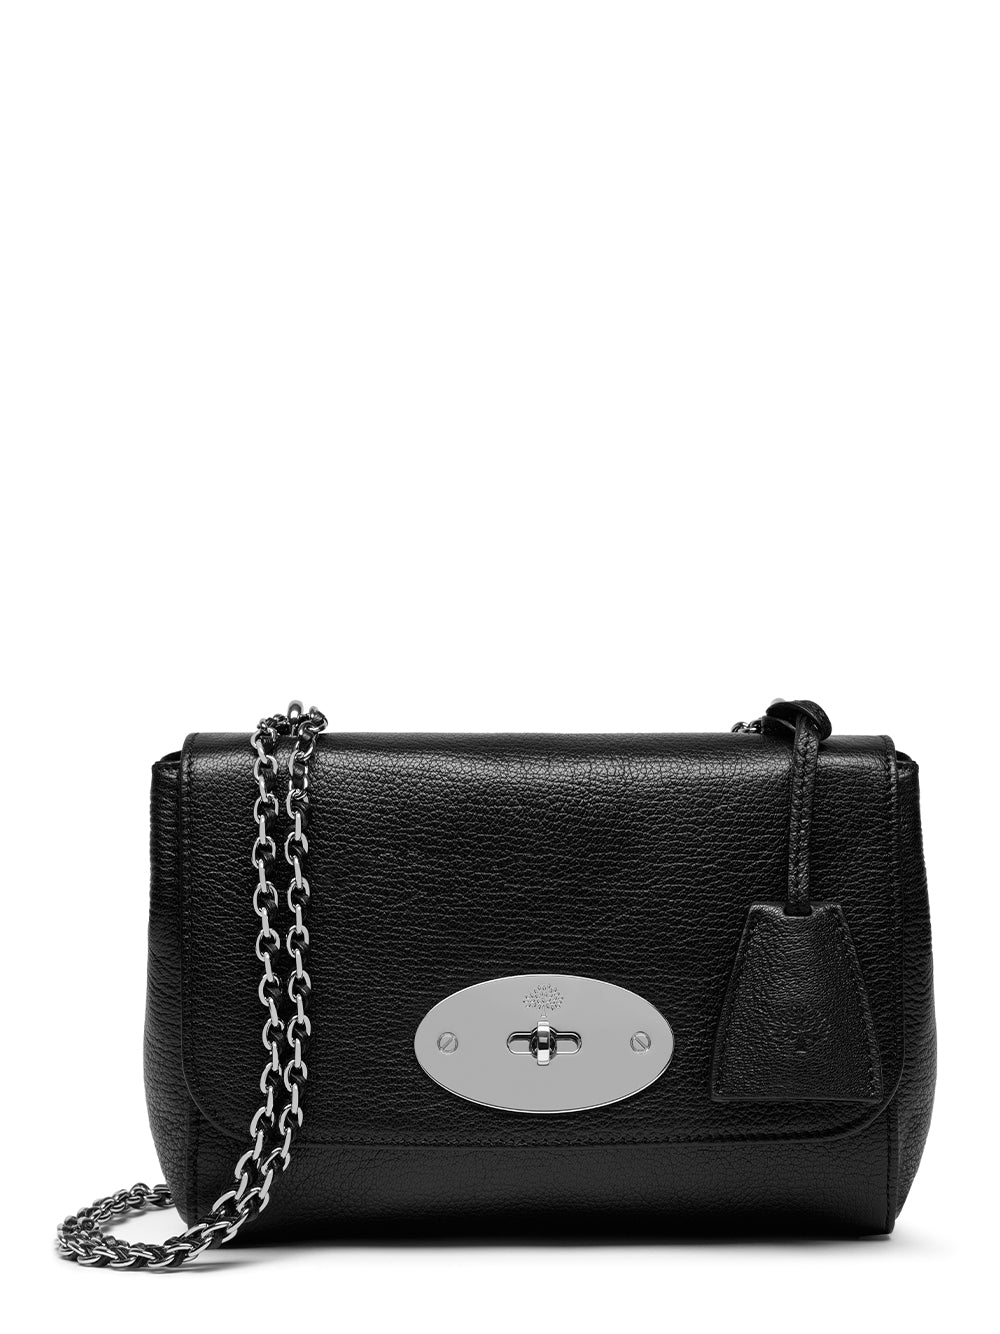 MULBERRY-Lily-Glossy-Goat-Leather-Black-1